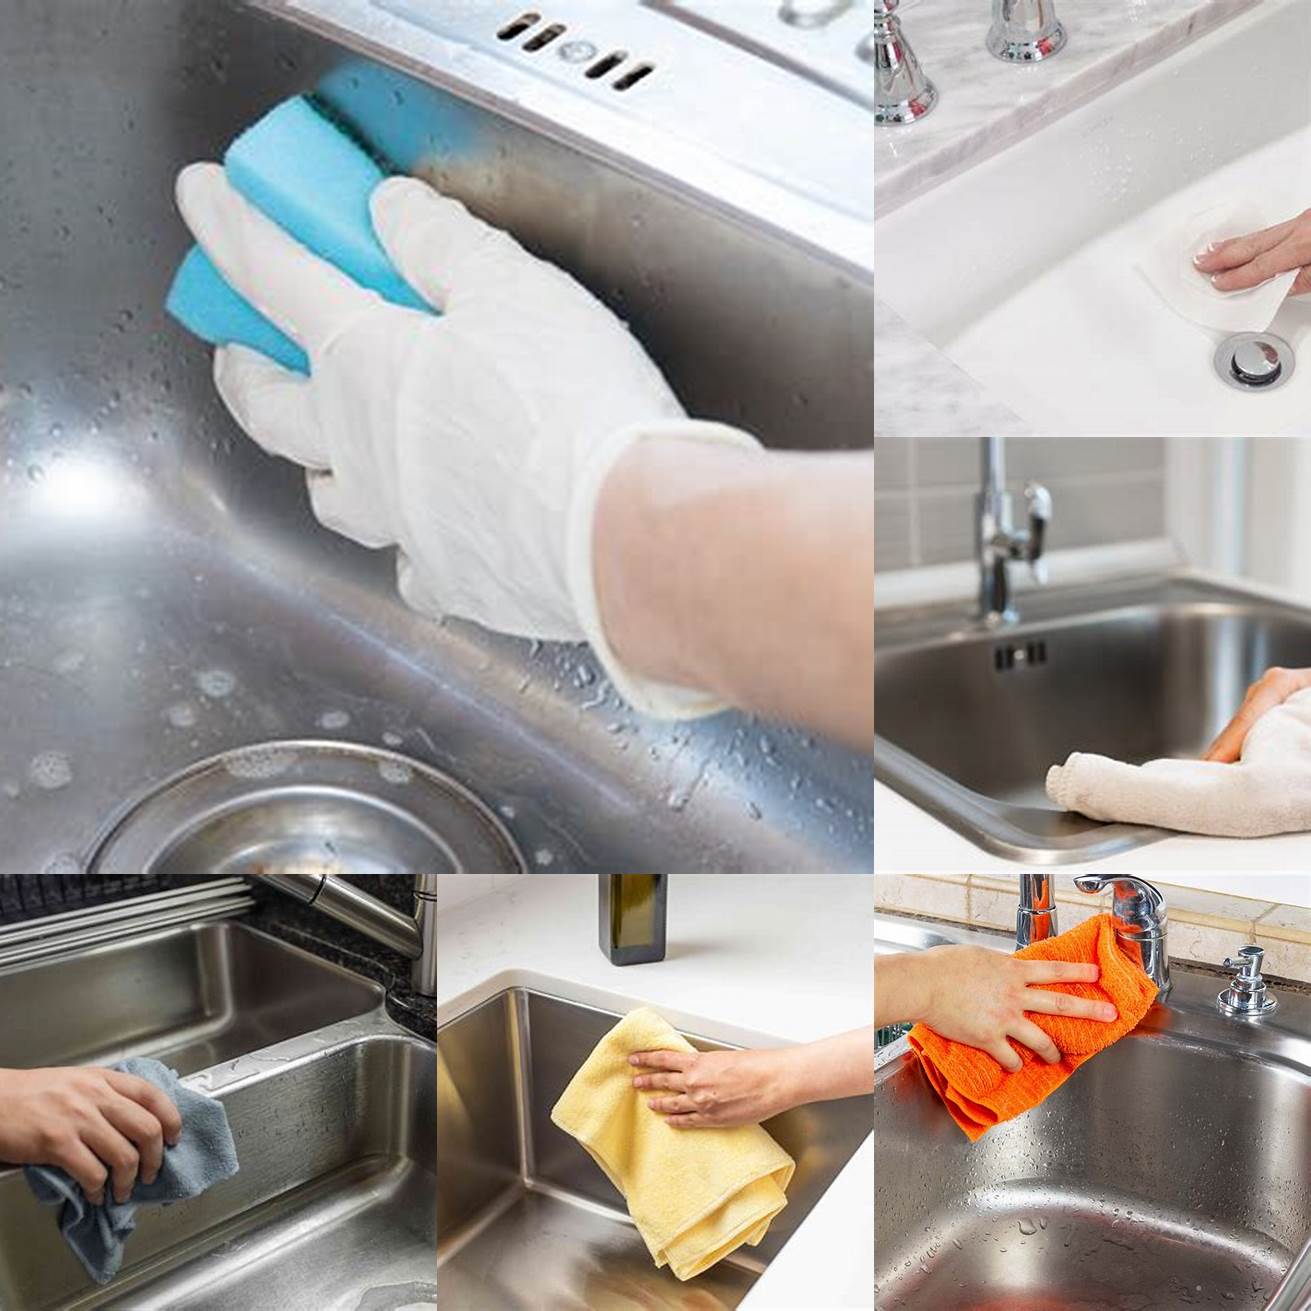 Wipe down the sink after each use to prevent water spots and stains